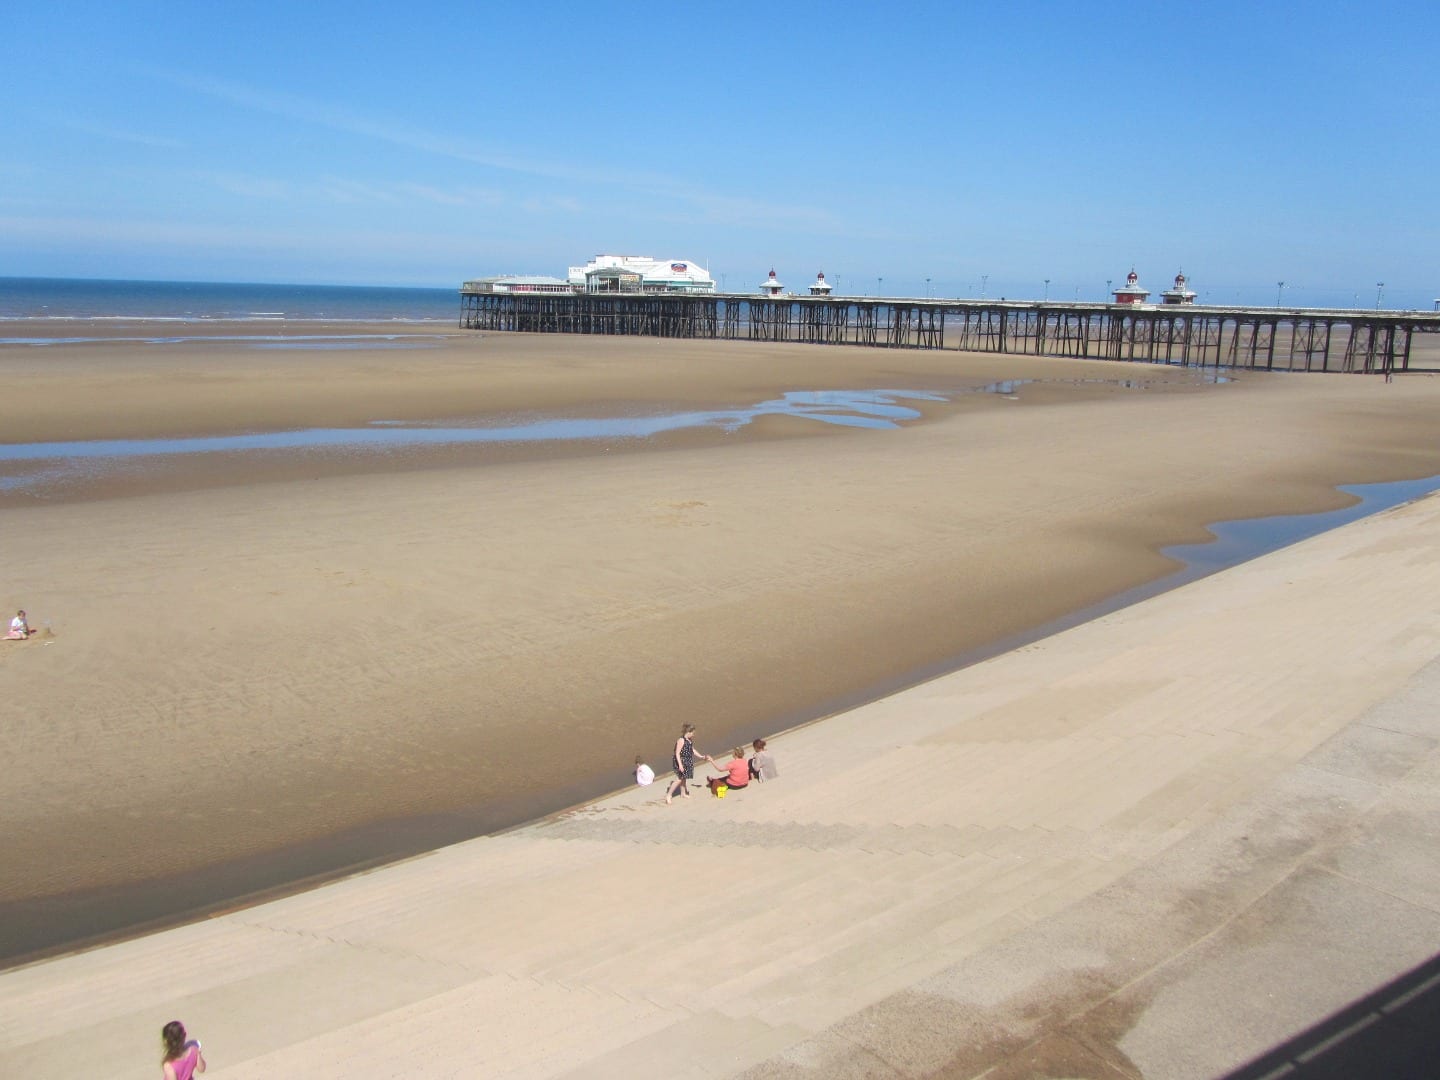 Looking after Blackpool beach